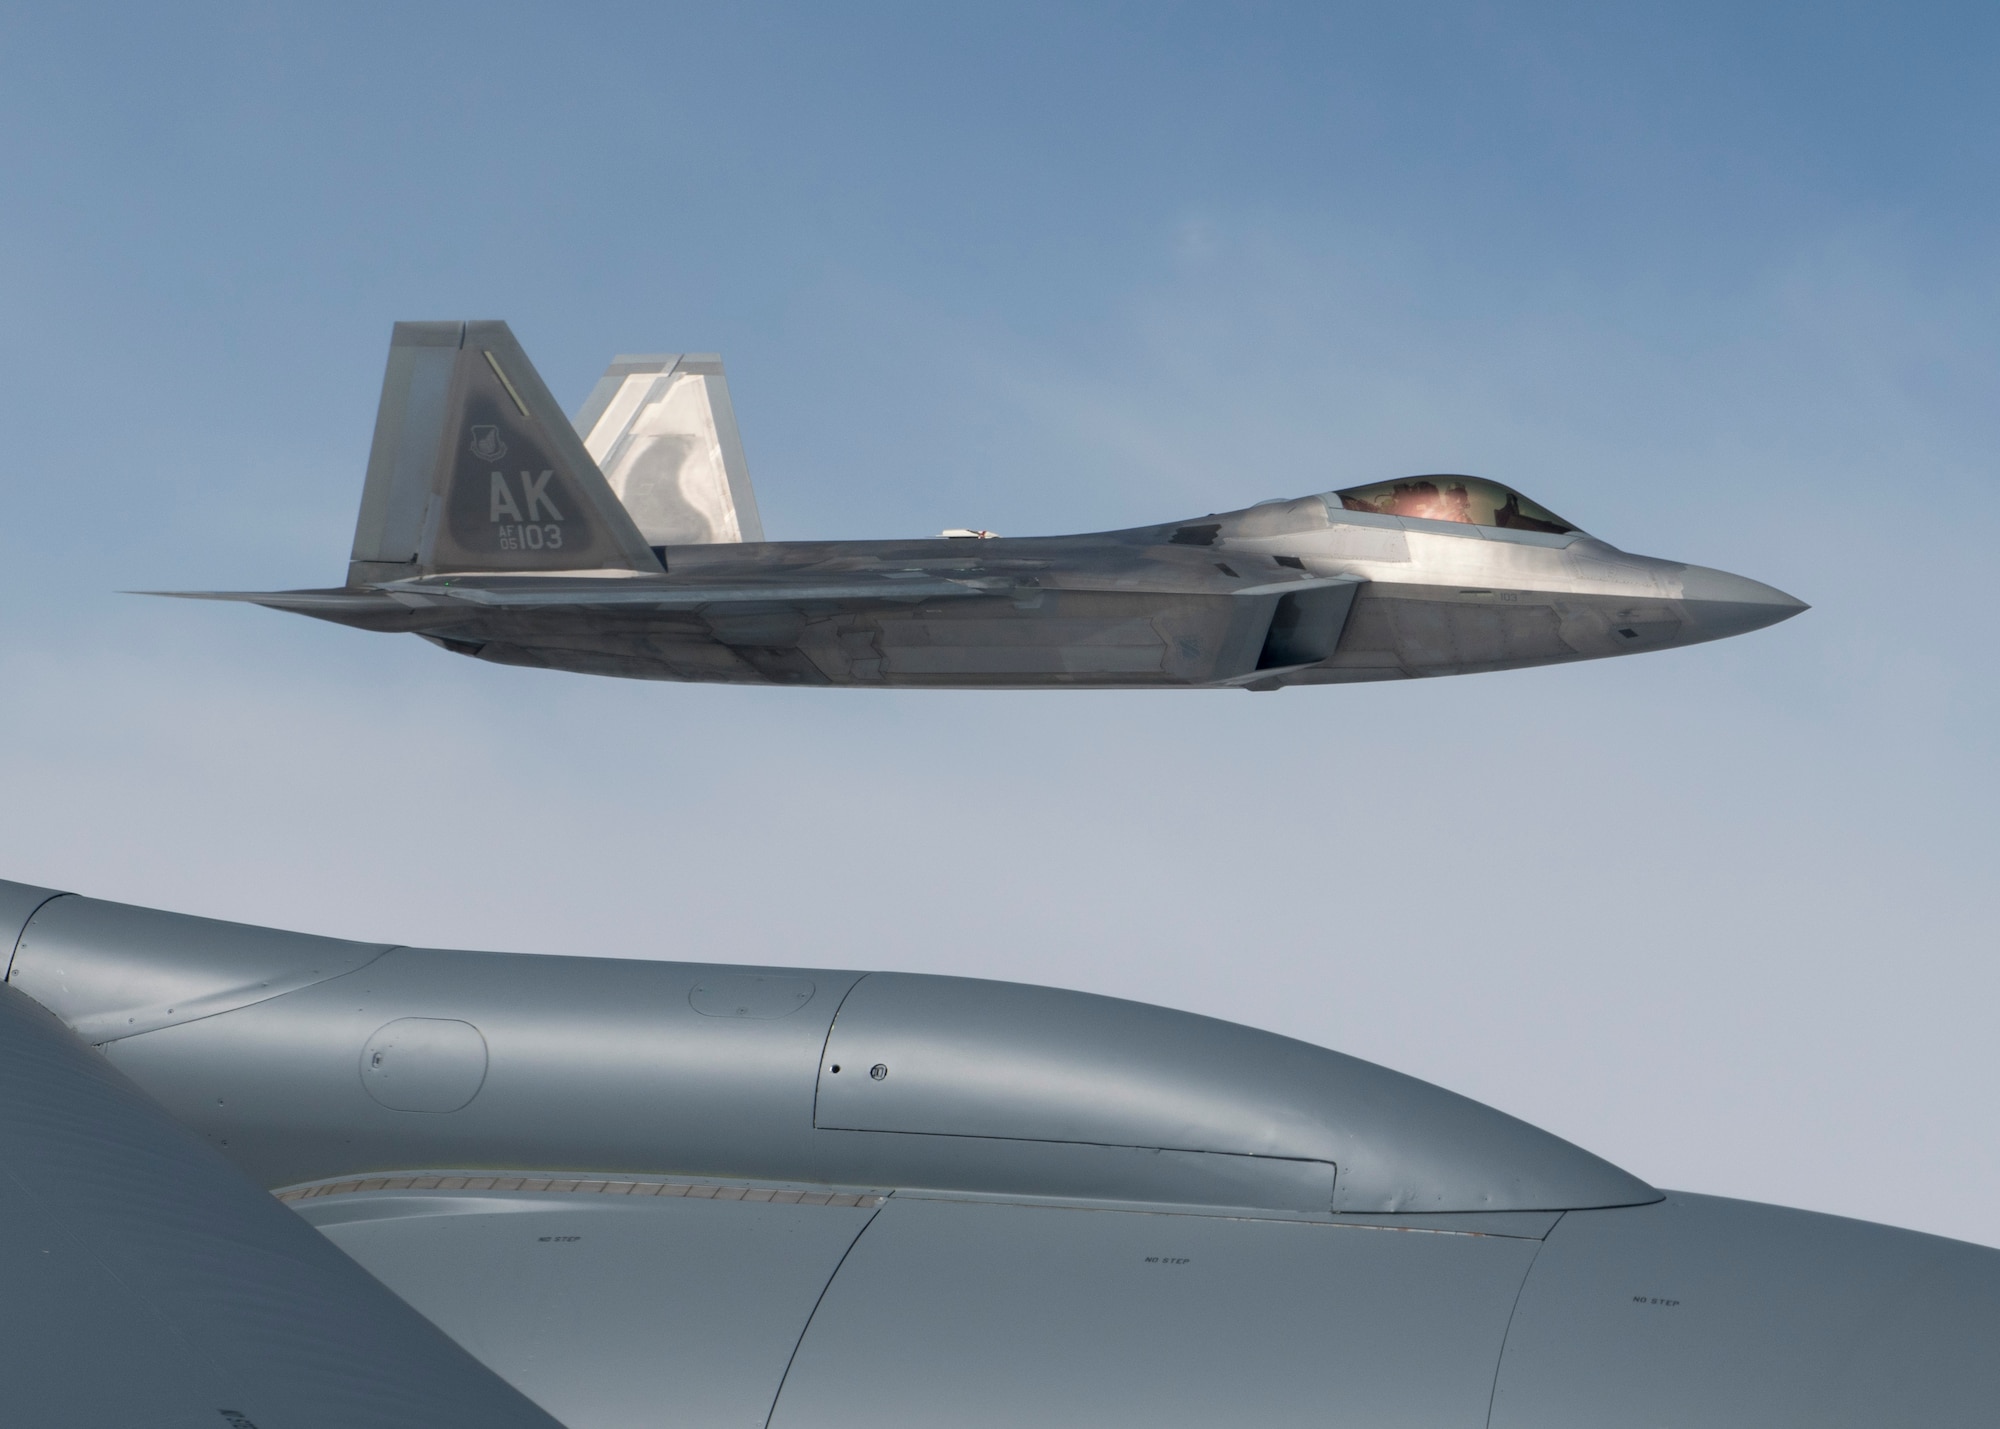 A U.S. Air Force F-22 Raptor from the 354th Fighter Wing flies in formation by a KC-135 Stratotanker from the 92nd Air Refueling Wing during field training exercise Red Flag Alaska 20-3, Aug. 4, 2020. RFA 20-3 is conducted over the Joint Pacific Alaska Range Complex with air operations flown primarily out of Eielson Air Force Base and Joint Base Elmendorf-Richardson, Alaska. (U.S. Air Force photo by Senior Airman Lawrence Sena)